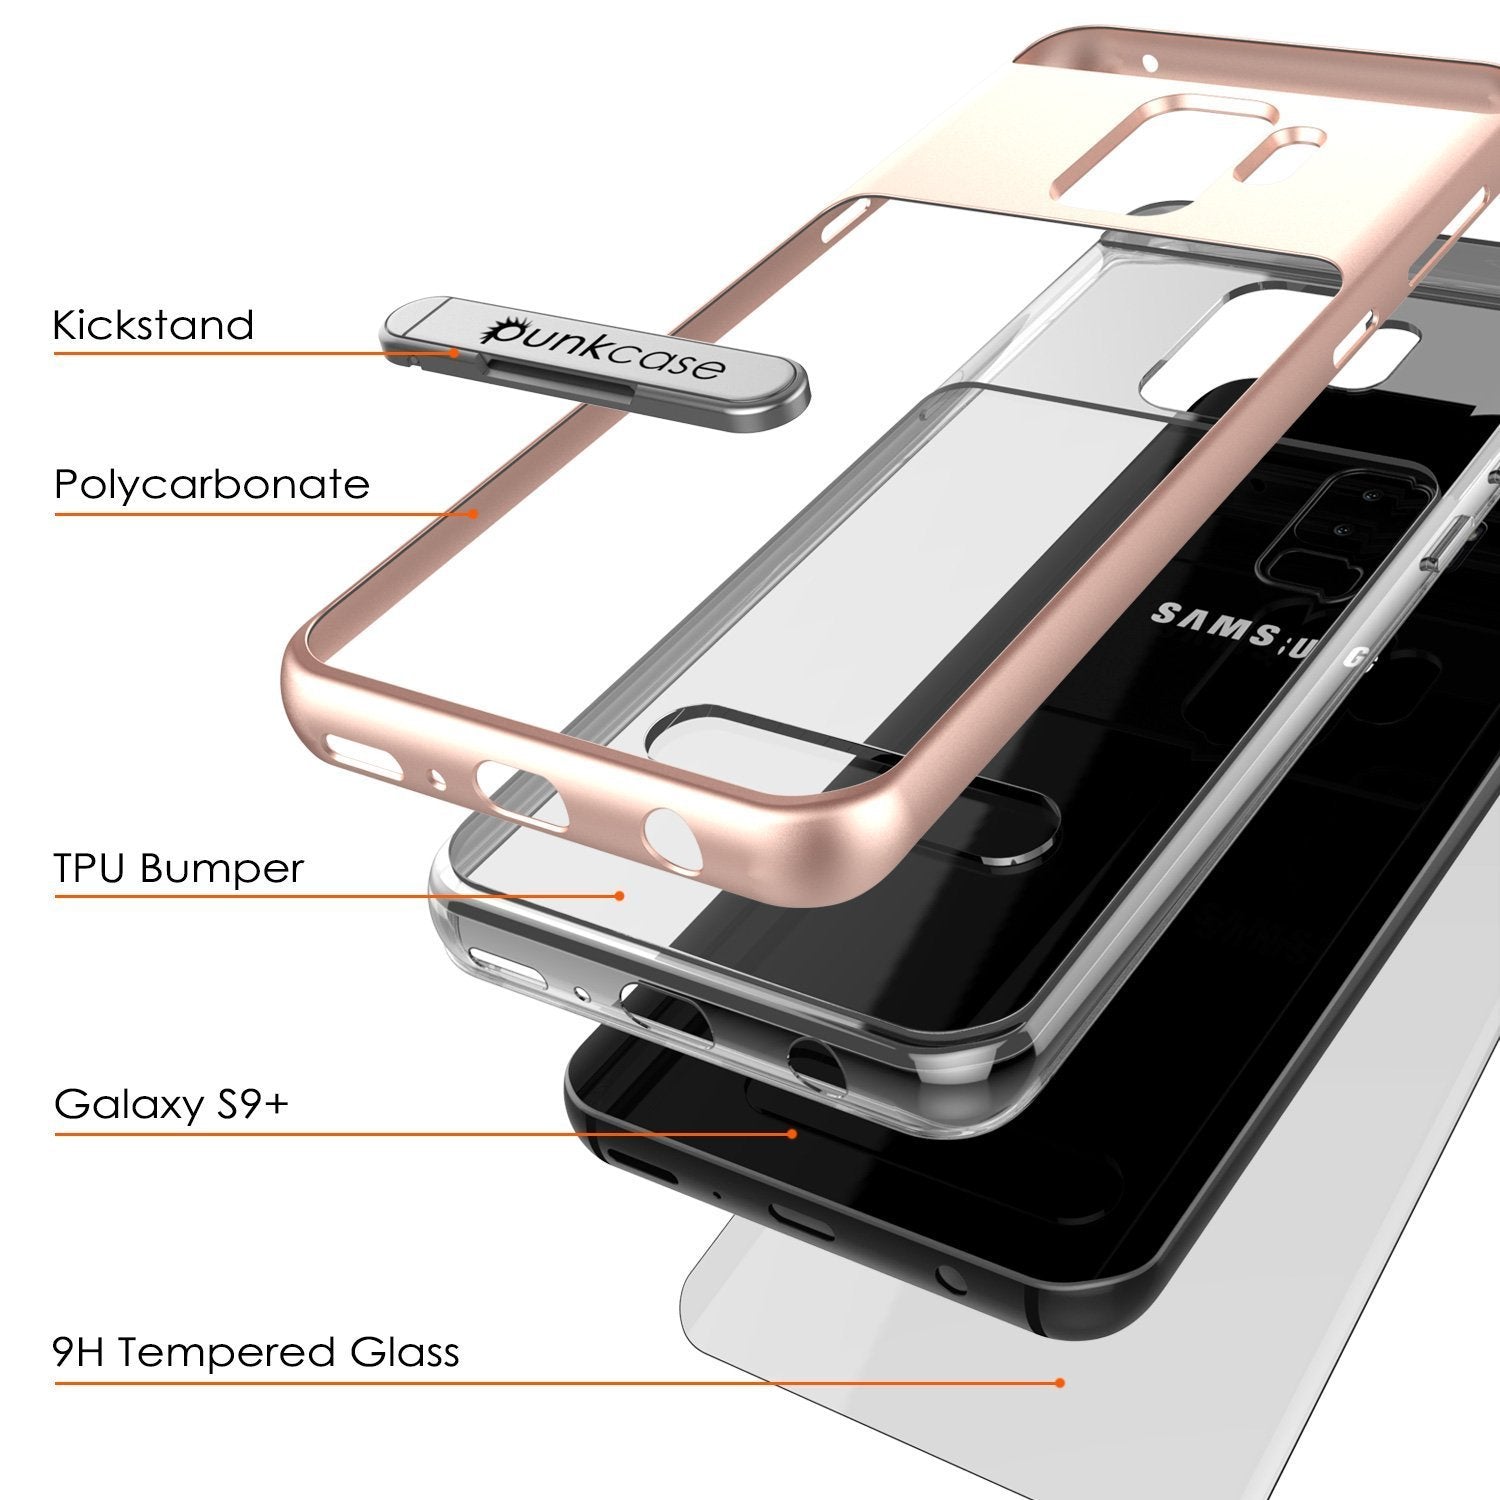 Galaxy S9+ Plus Case, PUNKcase [LUCID 3.0 Series] [Slim Fit] [Clear Back] Armor Cover w/ Integrated Kickstand, Anti-Shock System & PUNKSHIELD Screen Protector for Samsung Galaxy S9+ Plus [Rose Gold]